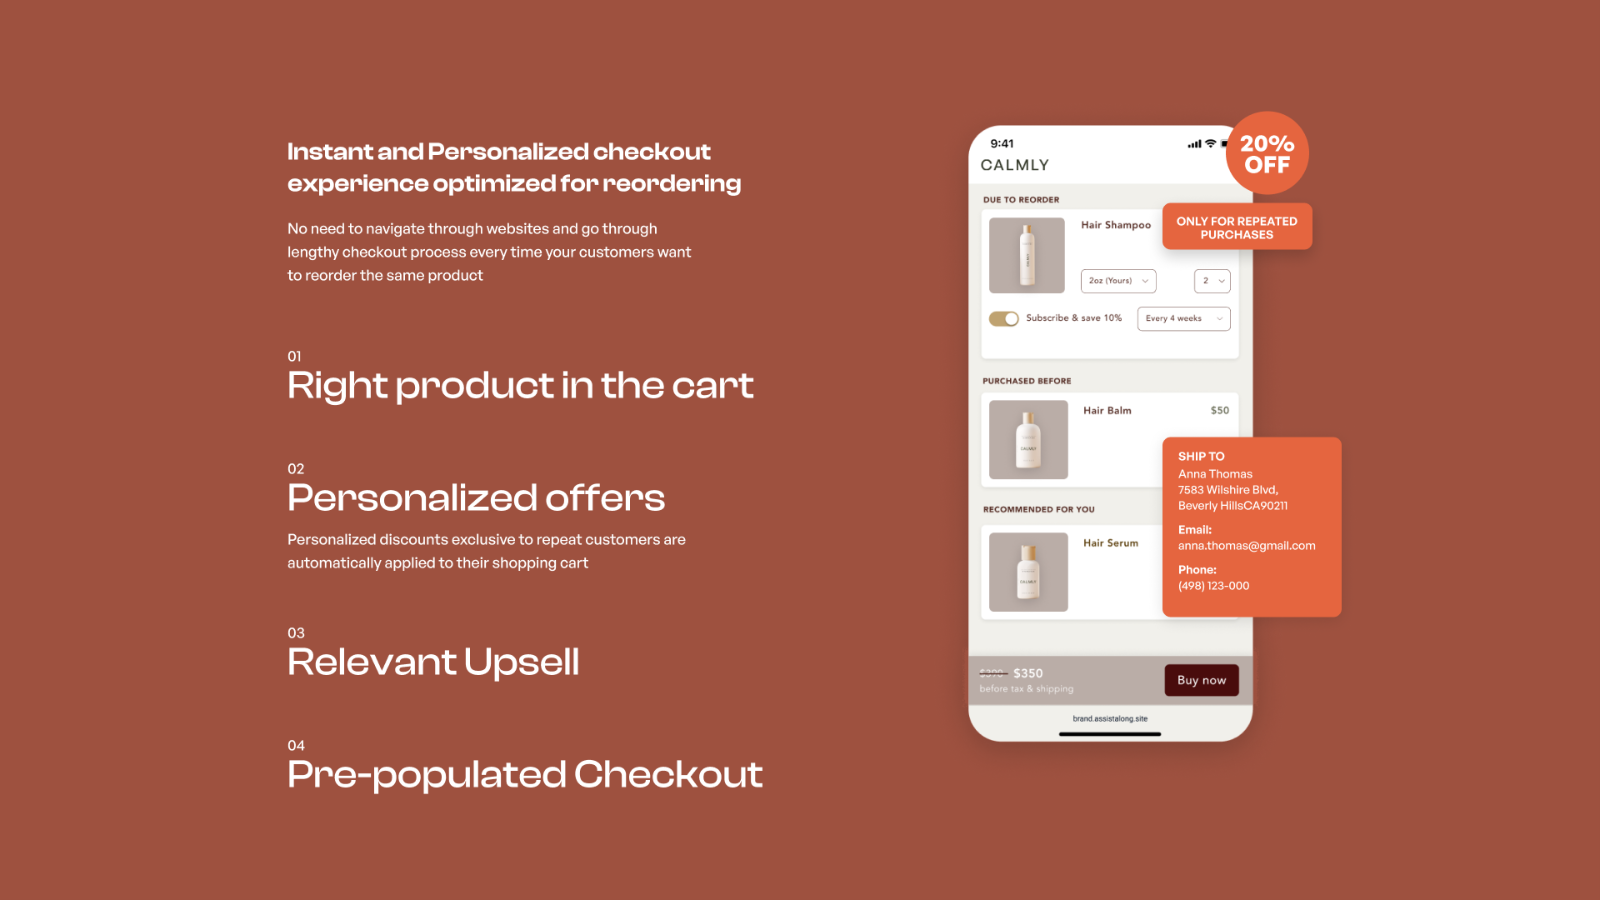 Instant and personalized checkout 